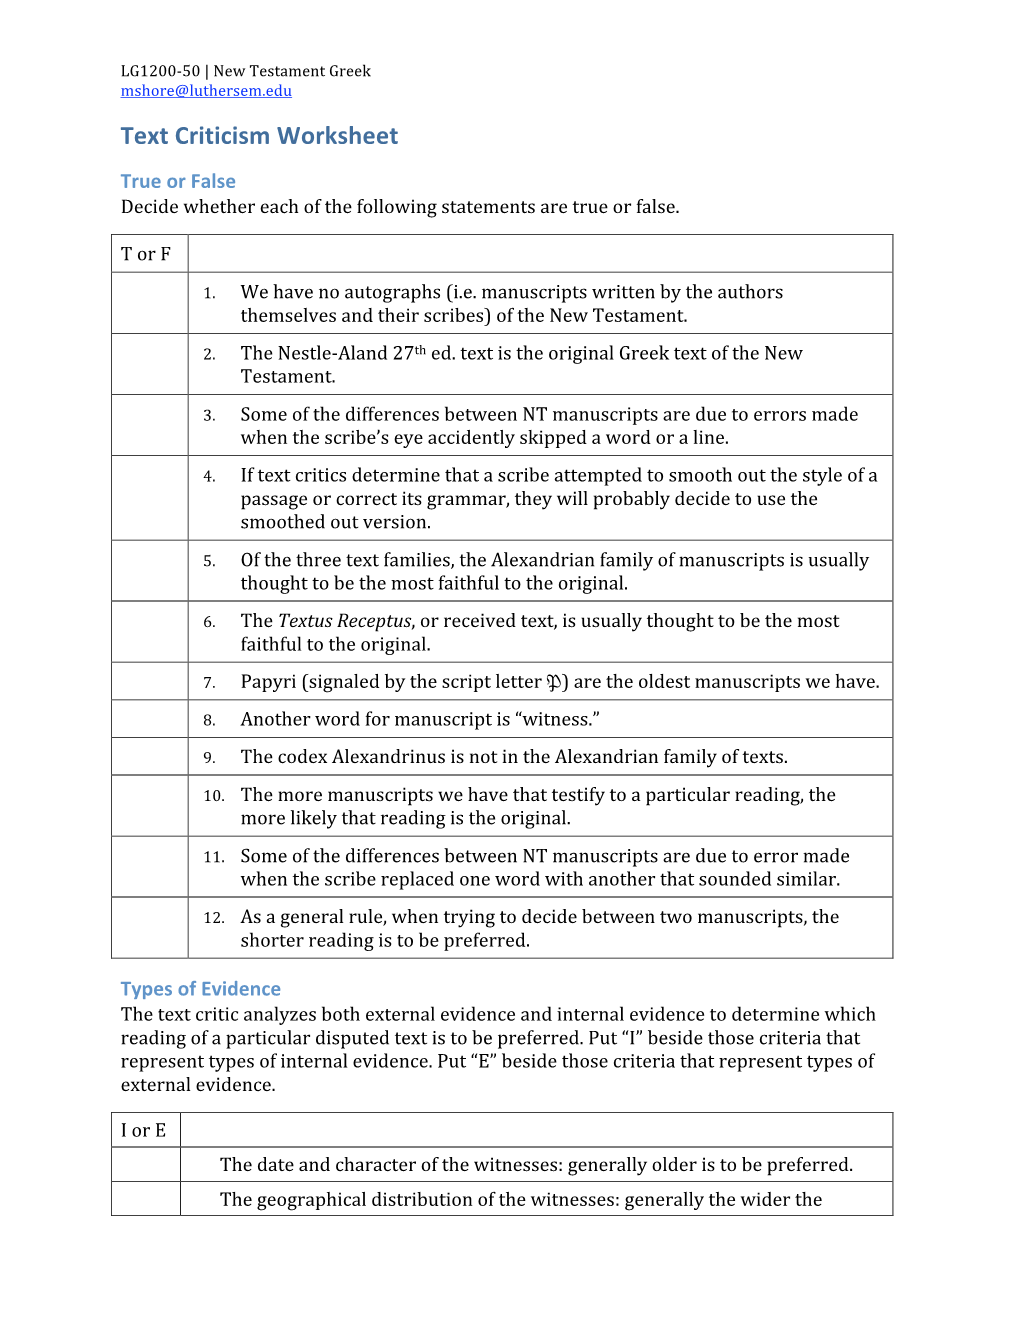 Text Criticism Worksheet True Or False Decide Whether Each of the Following Statements Are True Or False